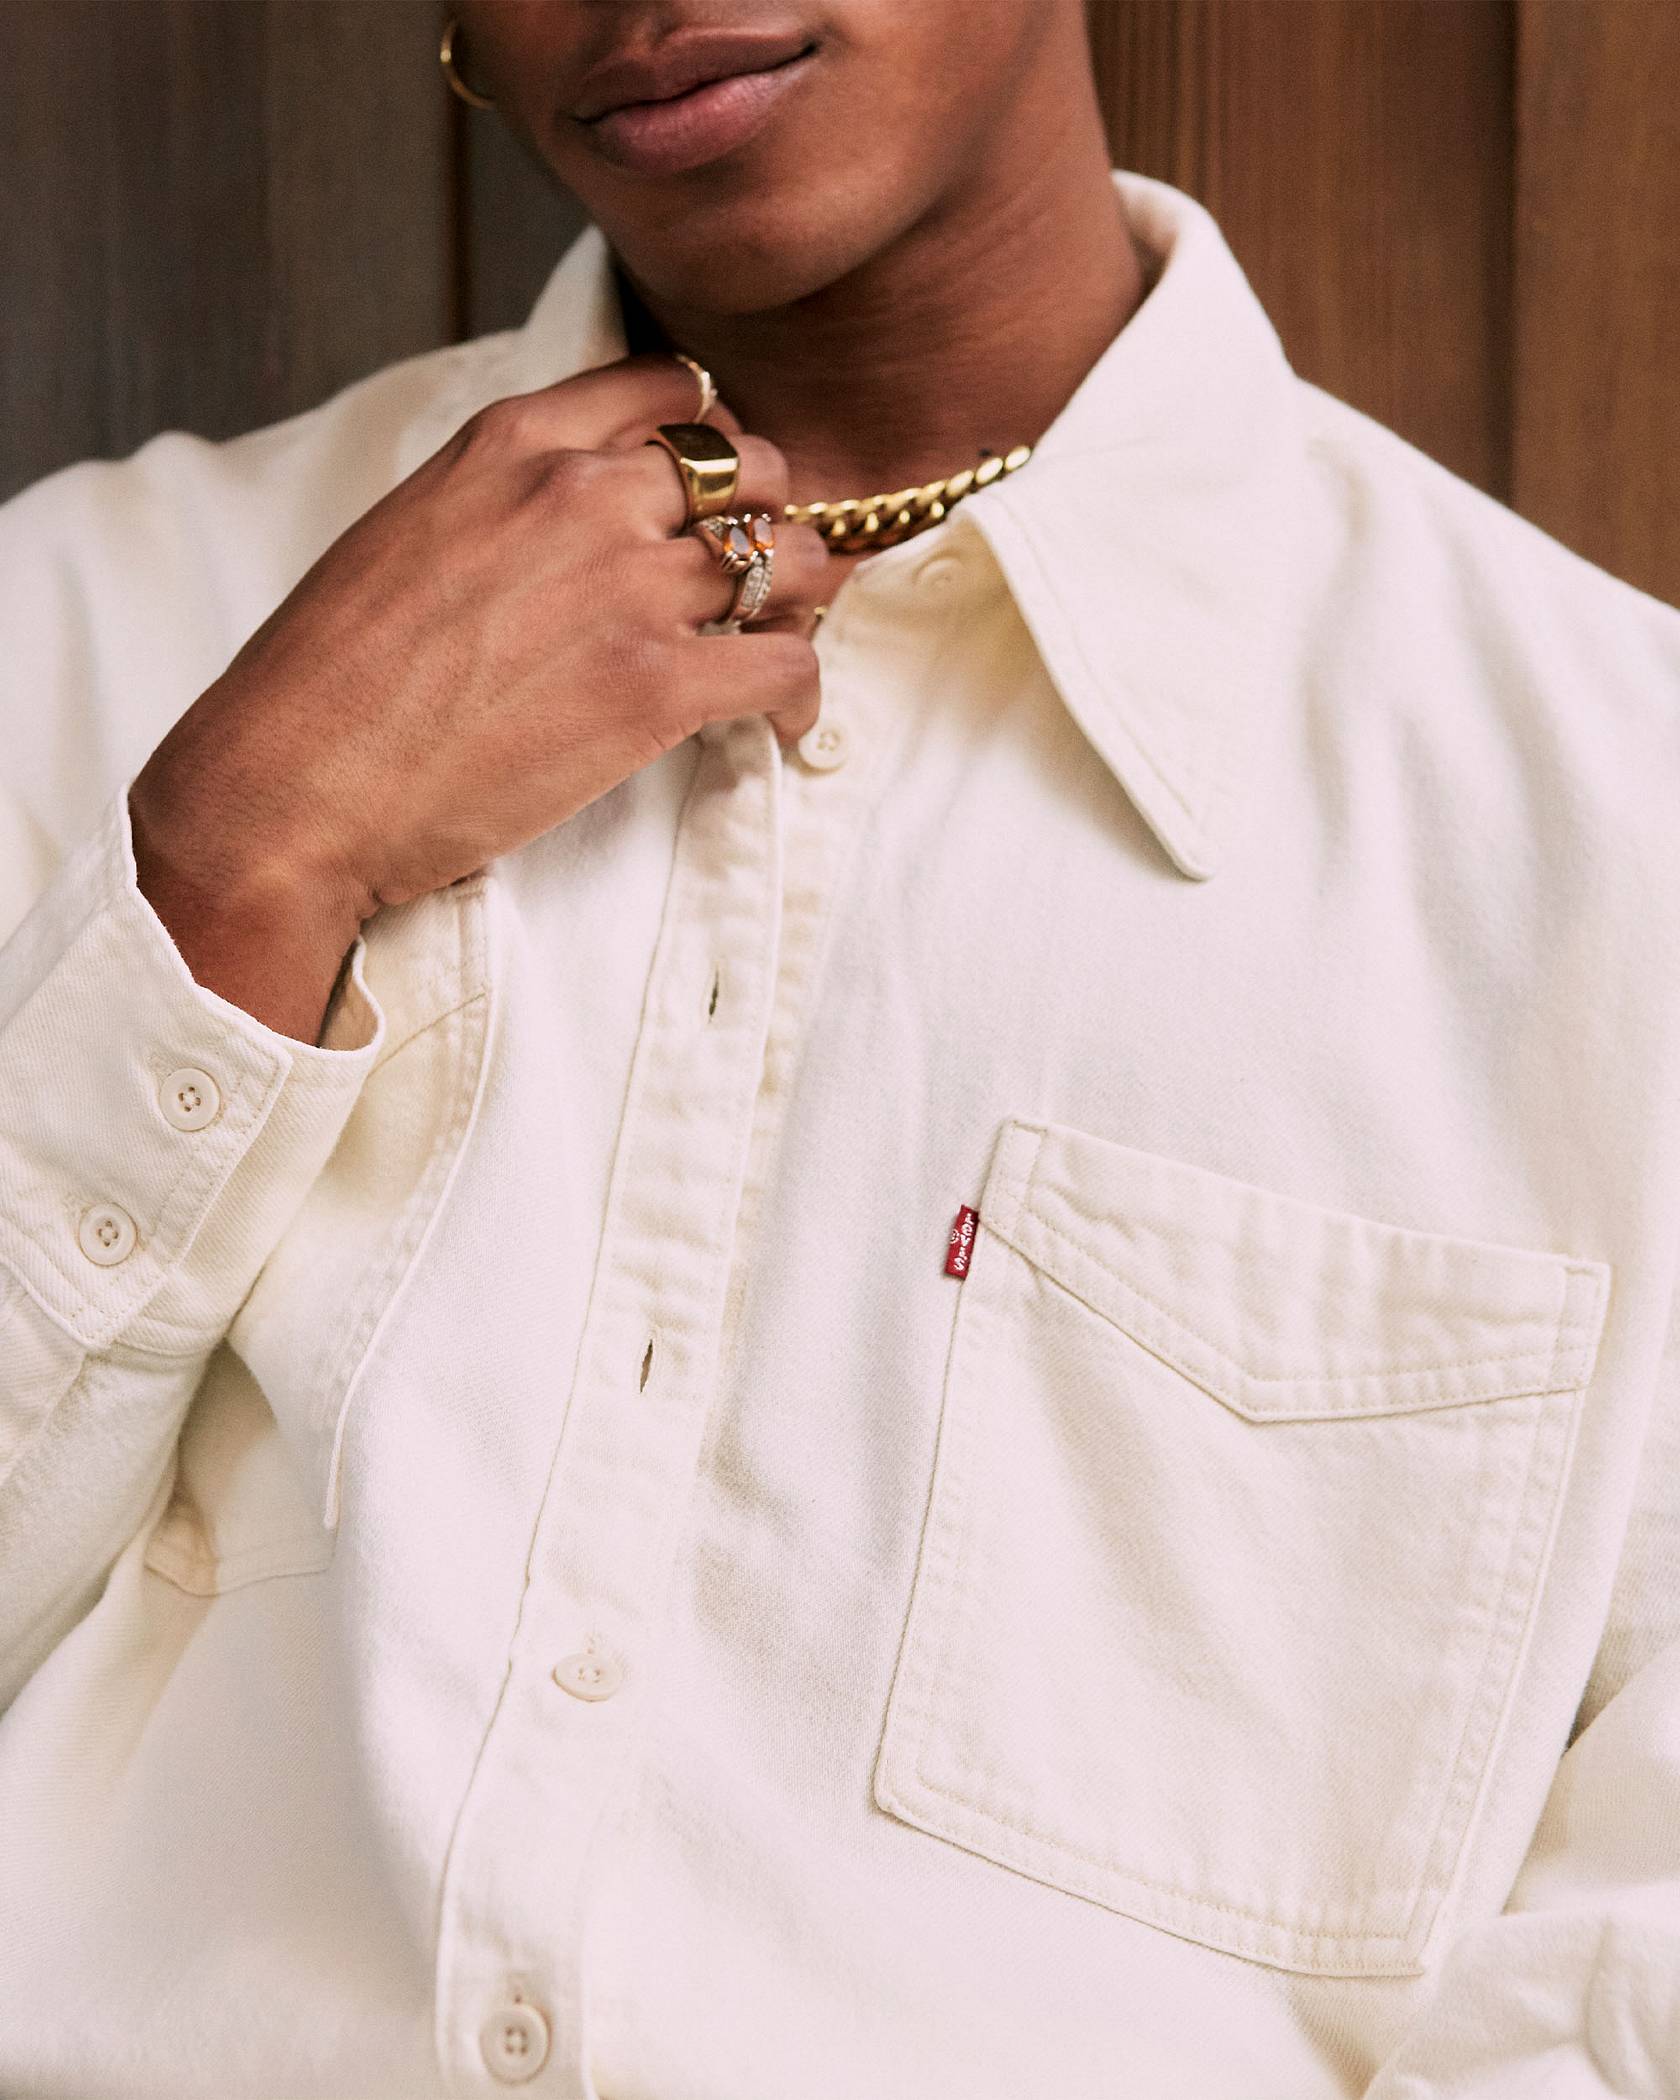 Back to School Shopping featuring close up of Perris Howard in white button down shirt